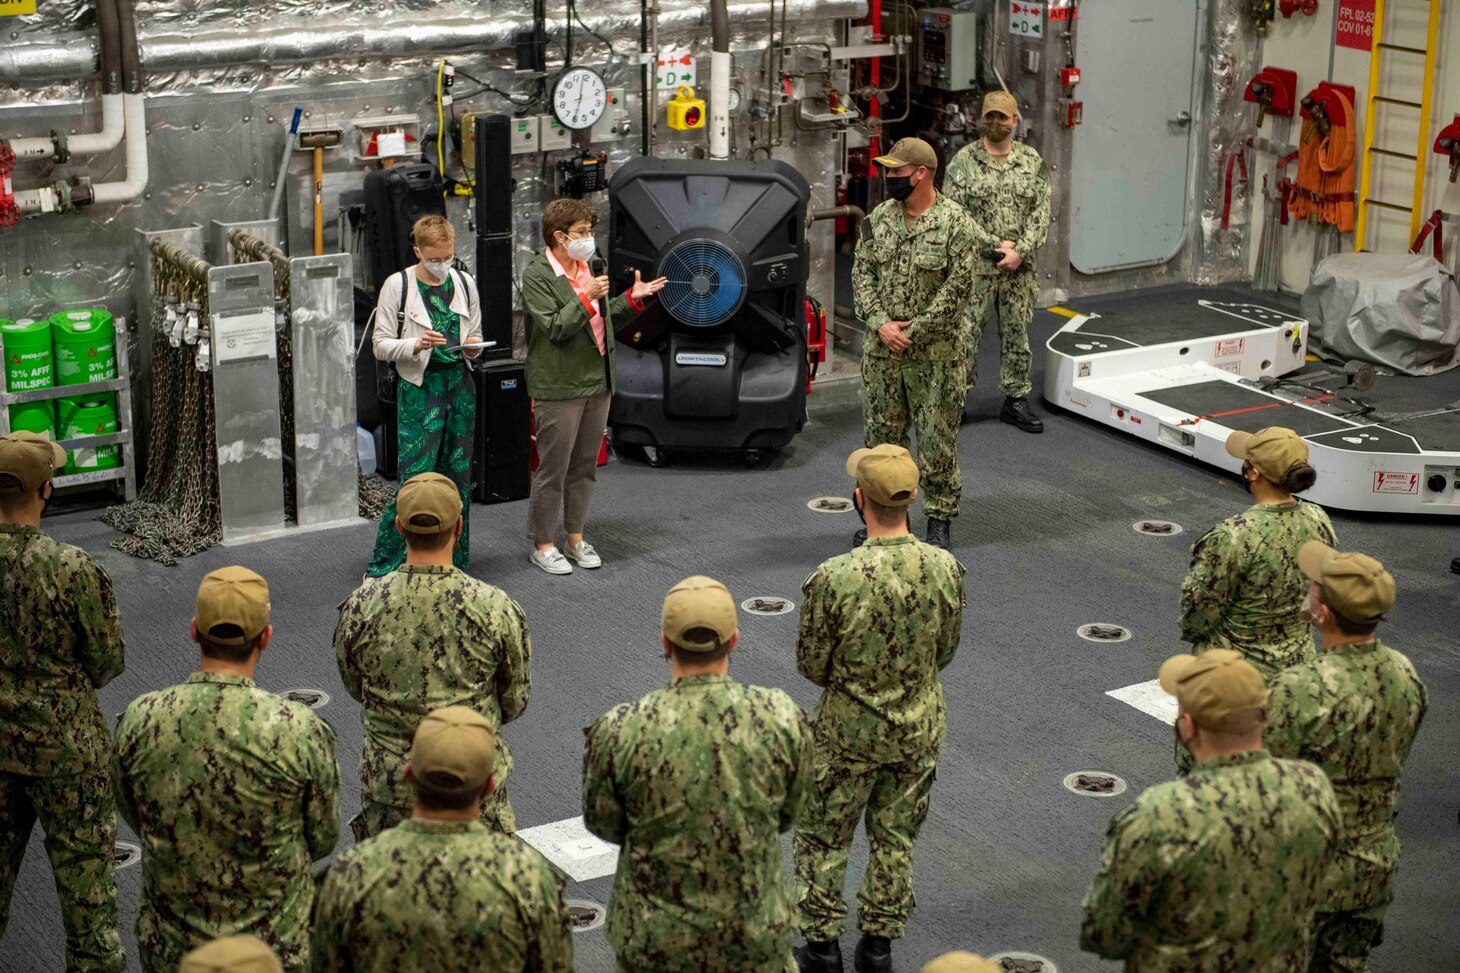 210528-N-WU807-1136 APRA HARBOR, Guam (May 28, 2021) German Defense Minister Annegret Kramp-Karrenbauer speaks with Sailors aboard Independence-variant littoral combat ship USS Charleston (LCS 18), May 28. Charleston, part of Destroyer Squadron Seven, is on a rotational deployment operating in the U.S. 7th Fleet area of operation to enhance interoperability with partners and serve as a ready response force in support of a free and open Indo-Pacific region. (U.S. Navy photo by Mass Communication Specialist 3rd Class Adam Butler)